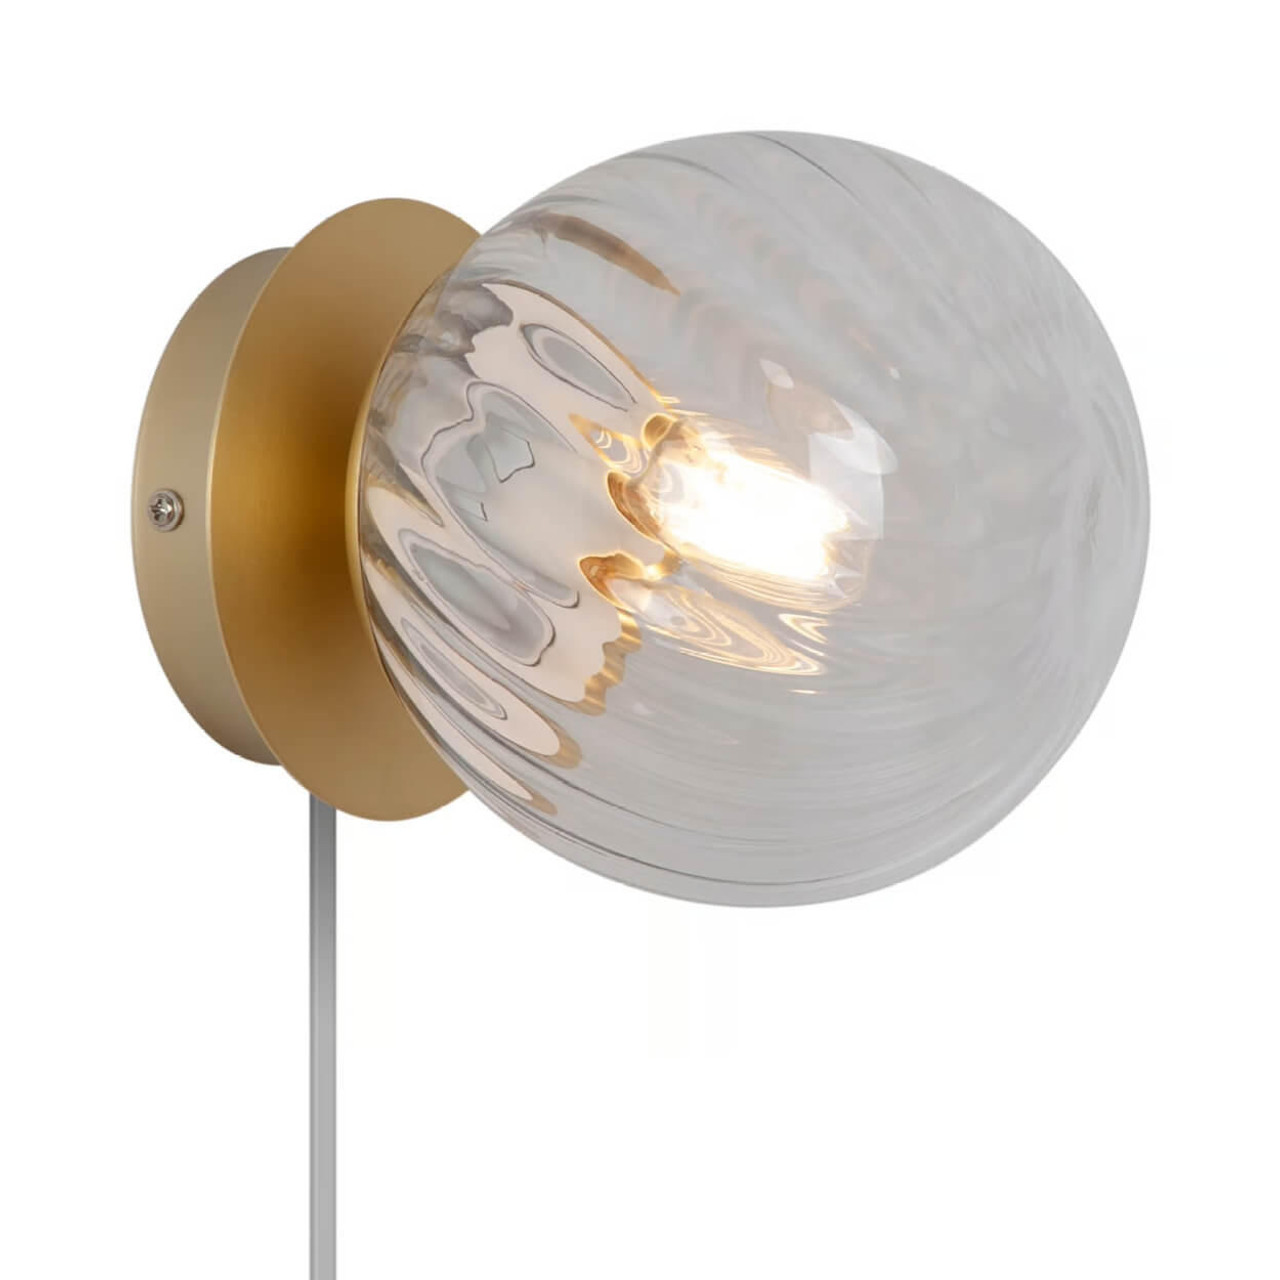  Nordlux Chisell Wall Light Brass 2312111035 